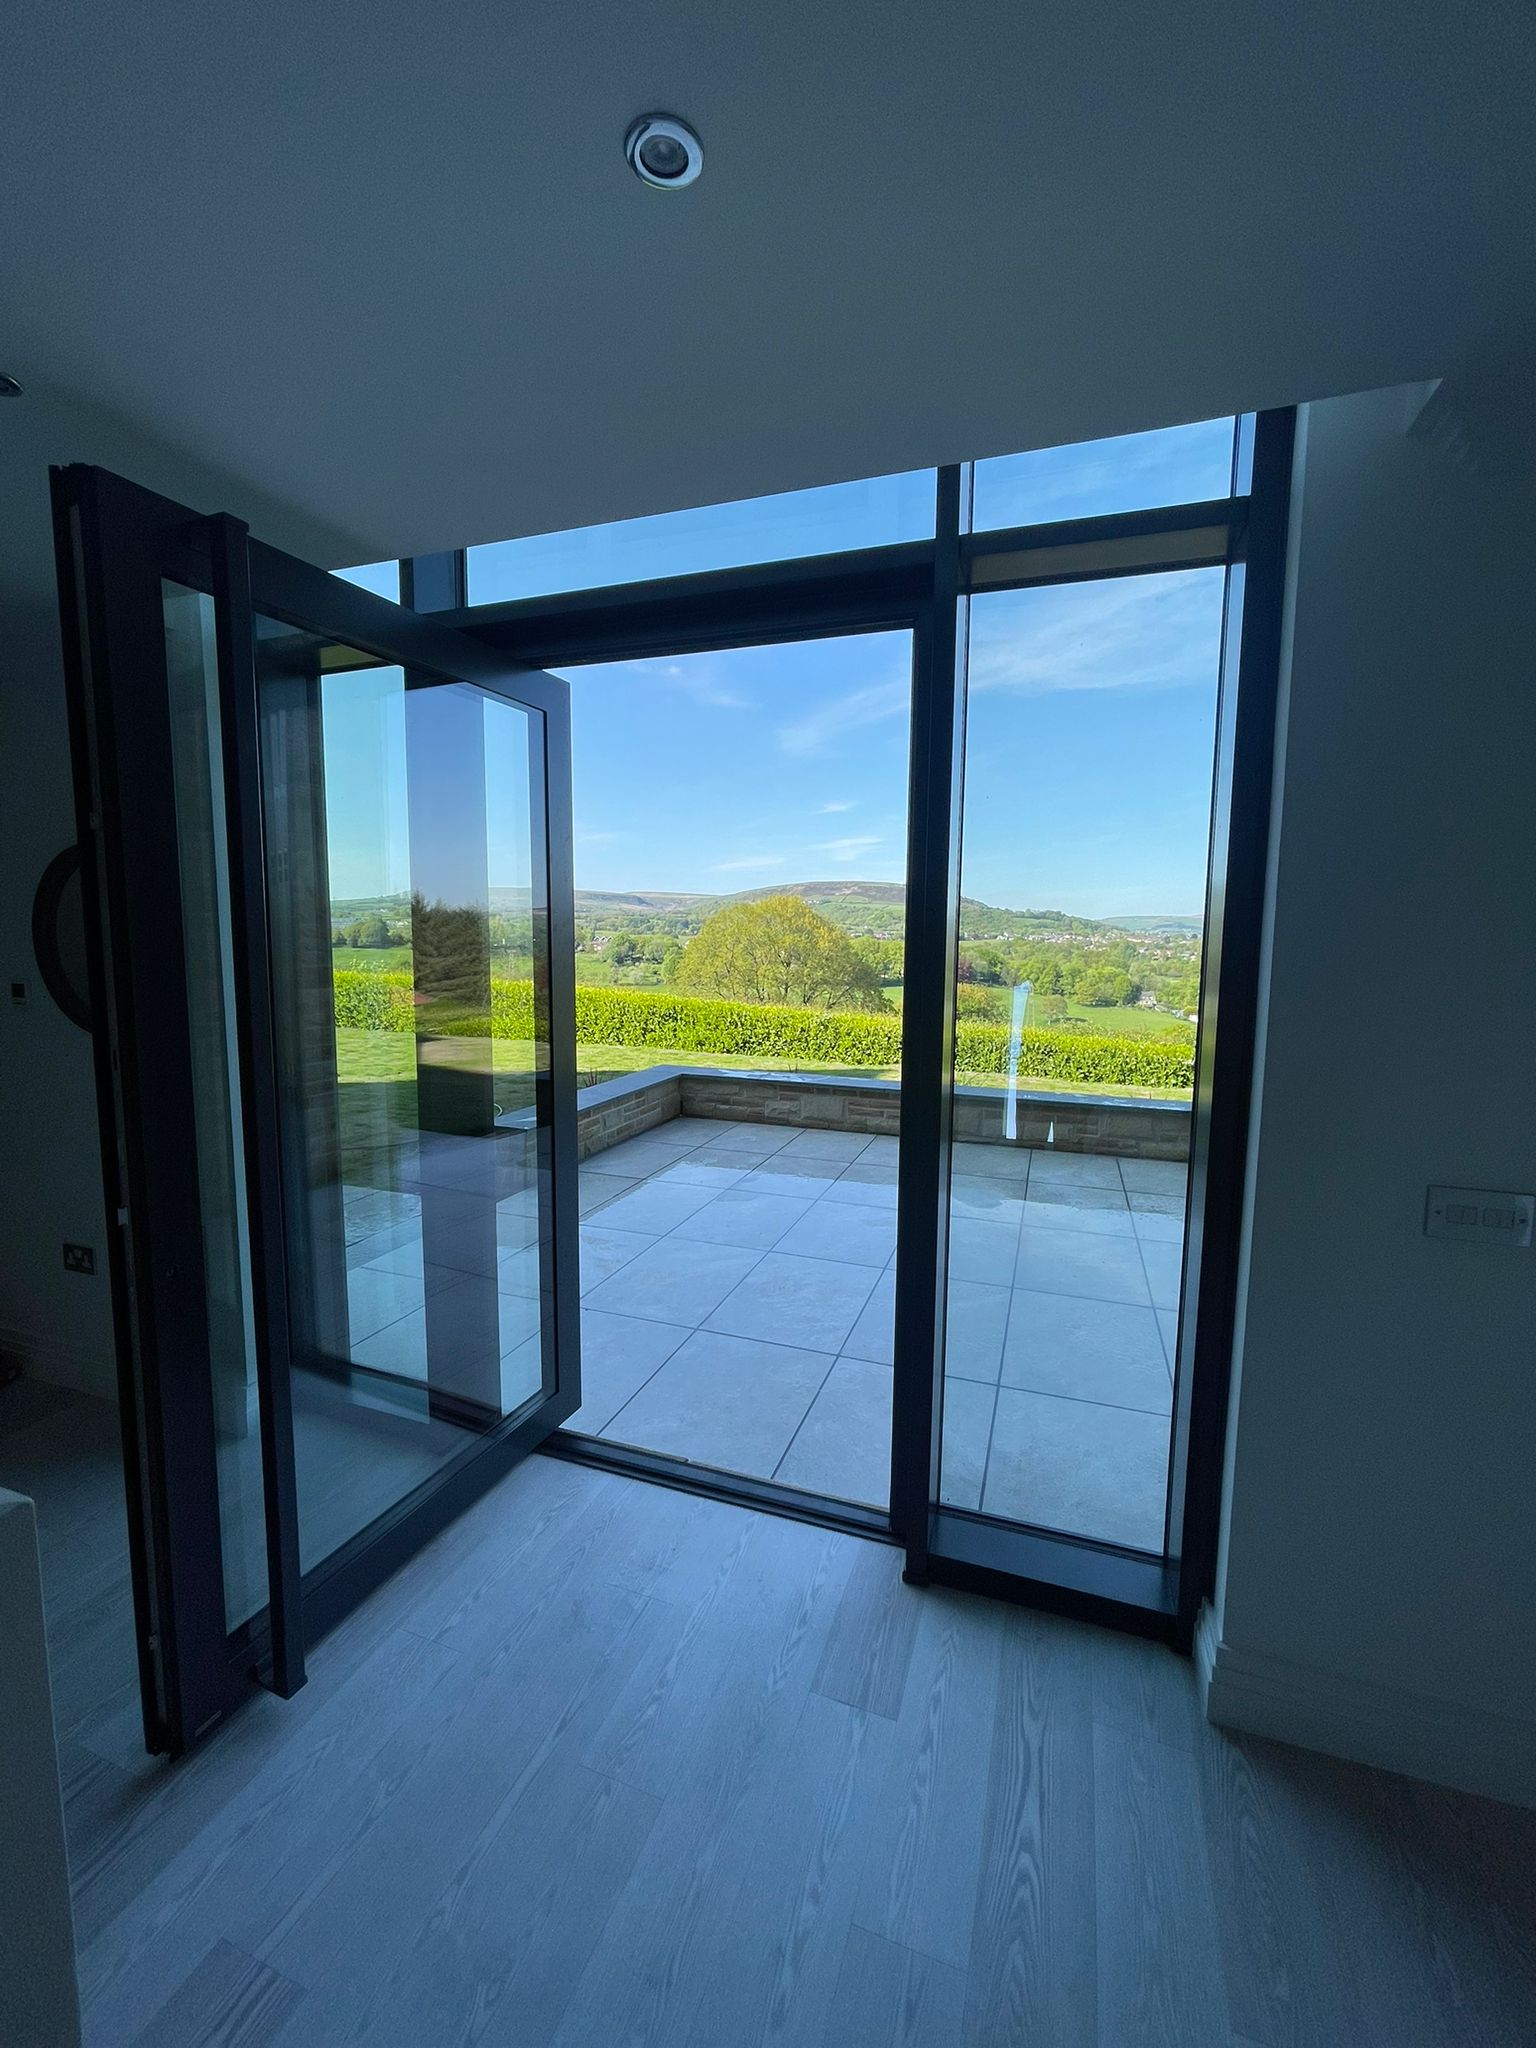 Glazed curtain wall - internal image with open pivot door